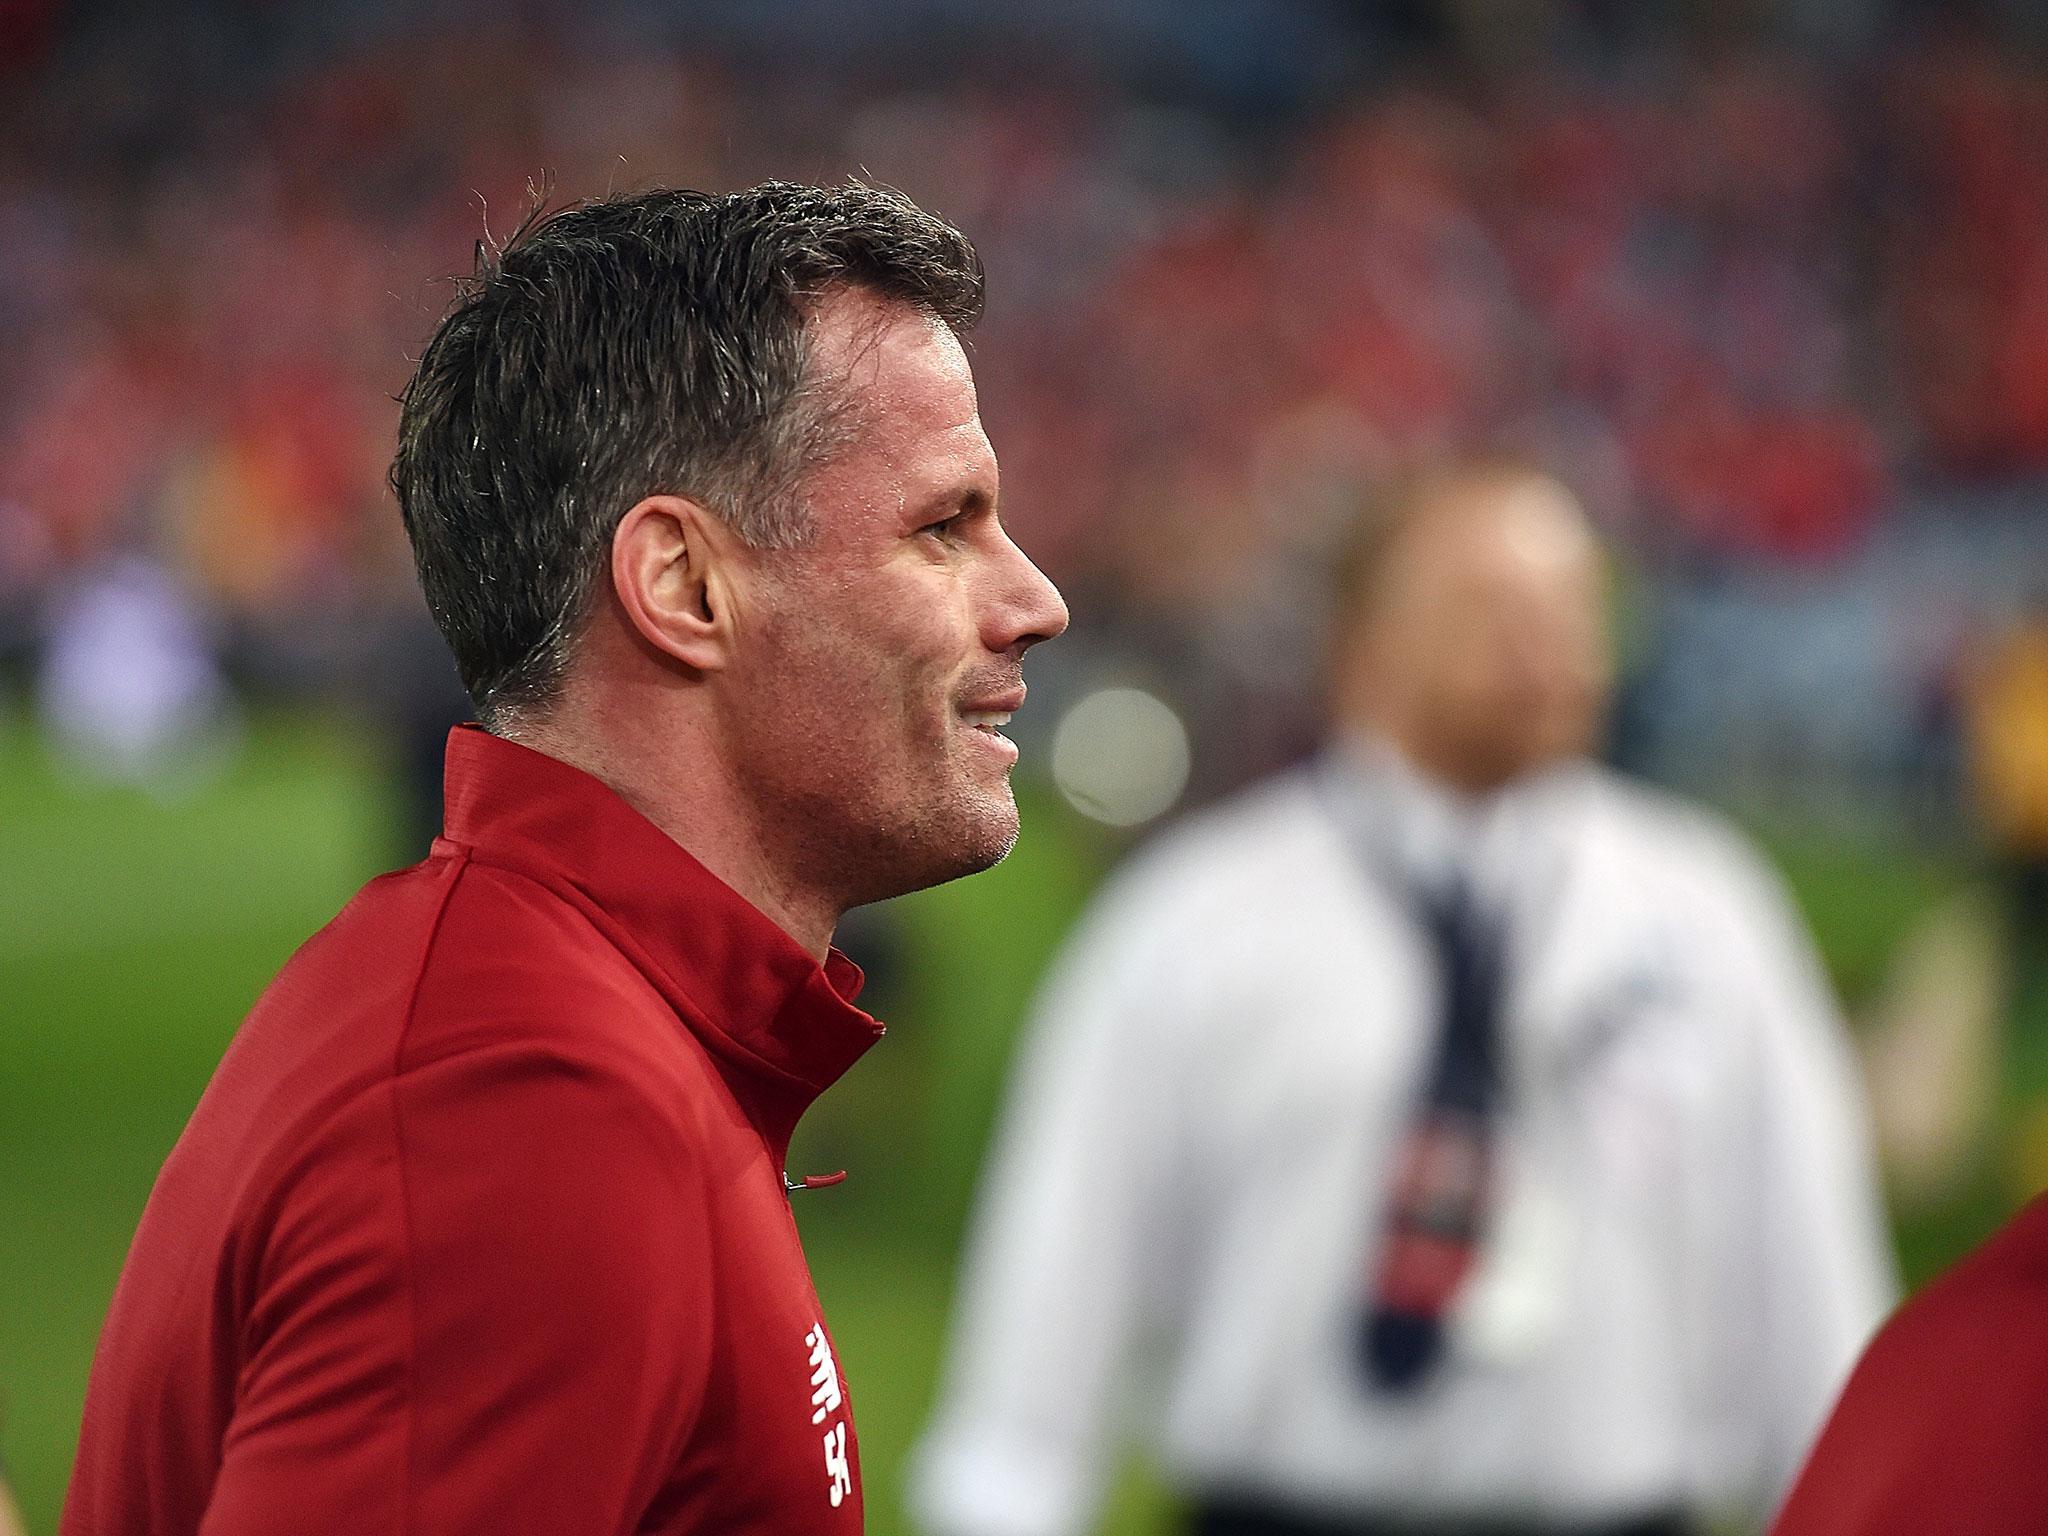 Jamie Carragher has had the latest laugh